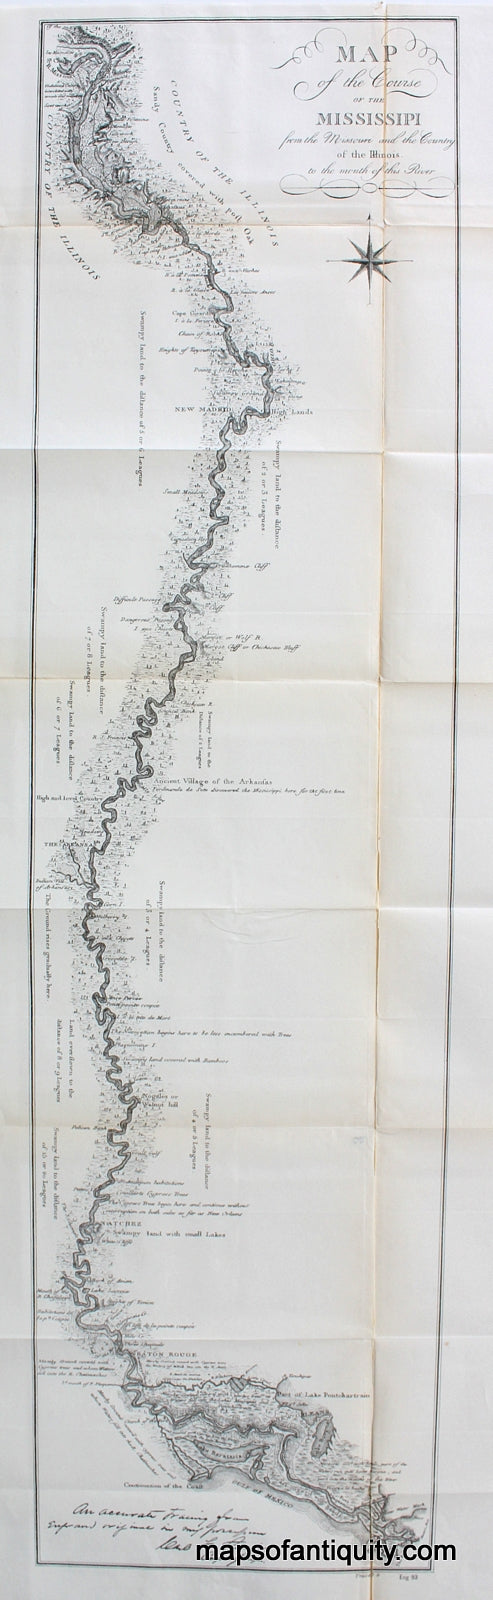 Black-and-White-Antique-Map-Reproduction-of-Earlier-Map-Map-of-the-Course-of-the-Mississippi-from-the-Missouri-and-the-Country-of-the-Illinois-to-the-mouth-of-the-River******-United-States-United-States-General---1880-US-Army-Corps-of-Engineers-Maps-Of-Antiquity